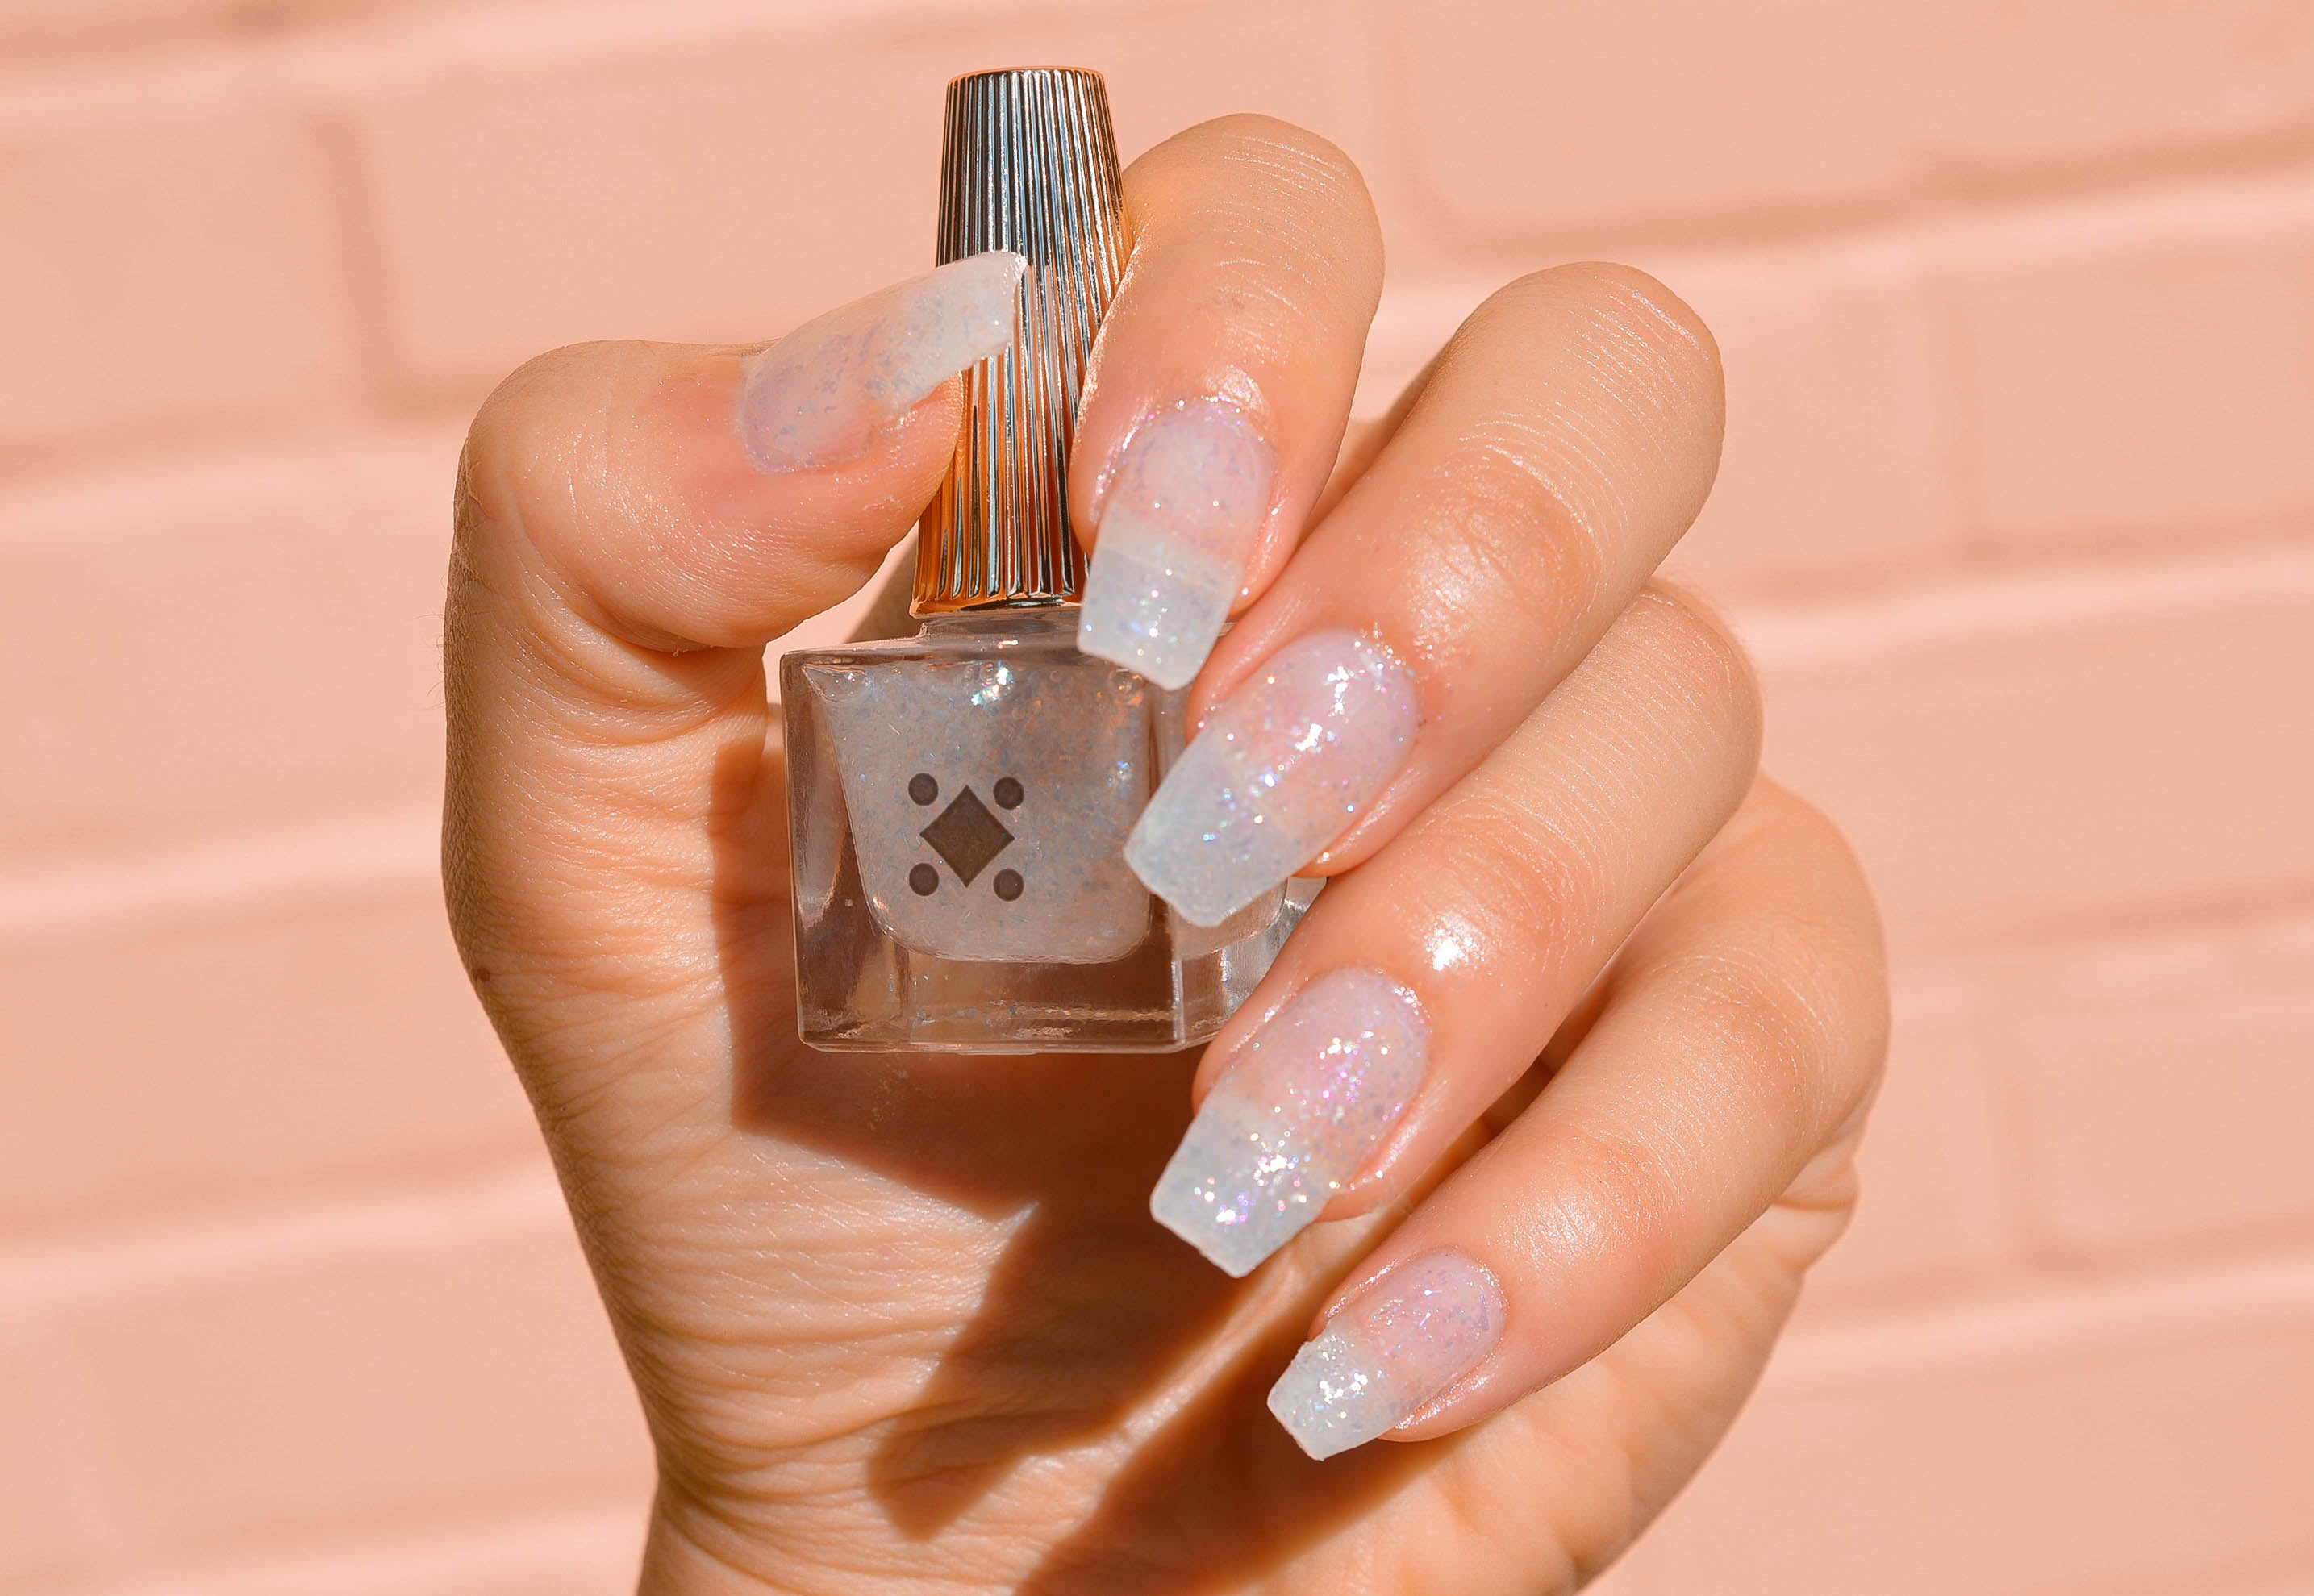 Seaglass Nails Are the New Jelly Nails (And They're Easy to Try at Home)